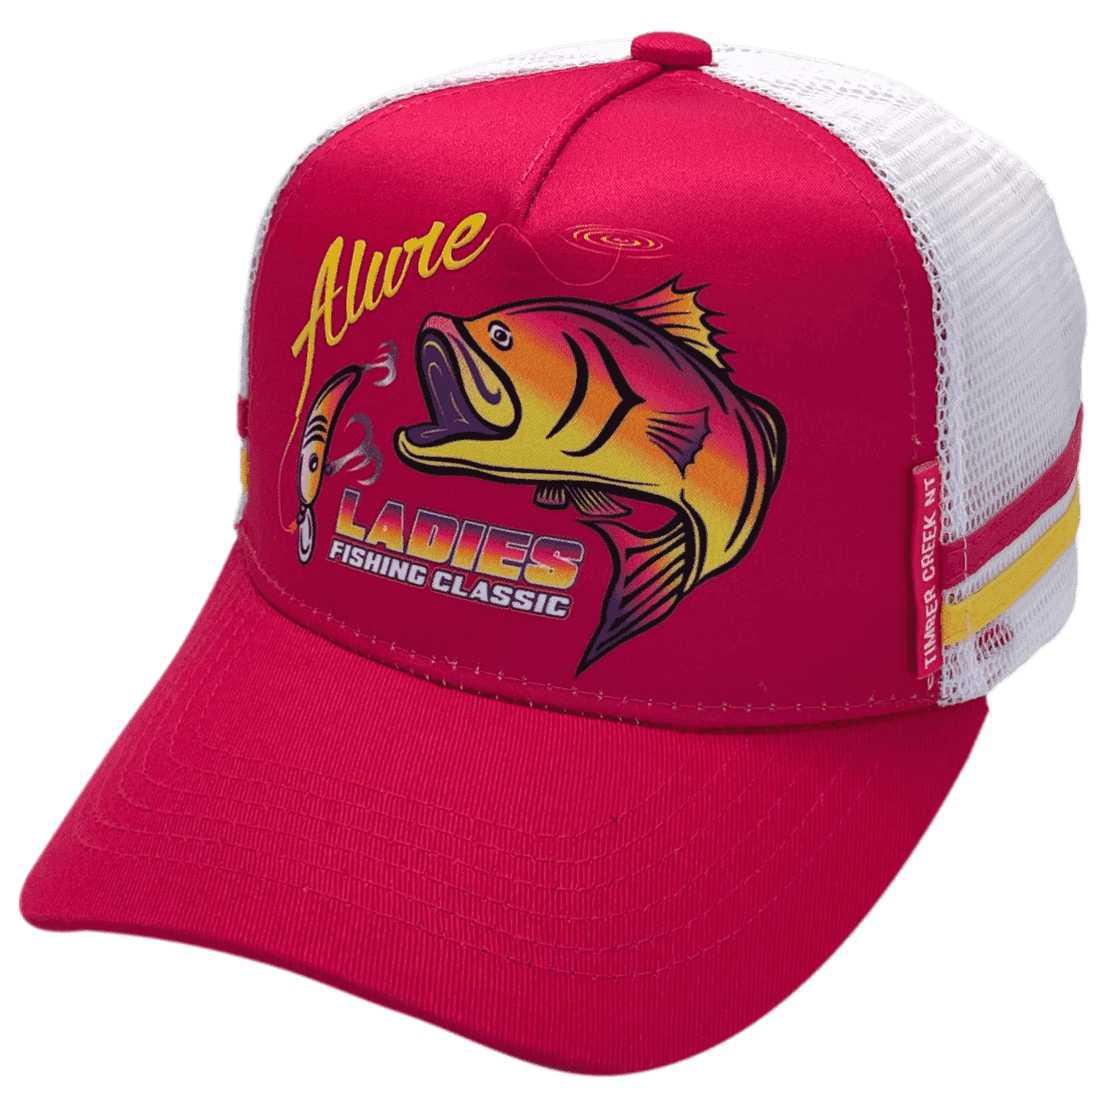 Alure Ladies Fishing Classic Timber Creek NT LP Original Midrange Aussie Trucker Hat with 2 Side Bands